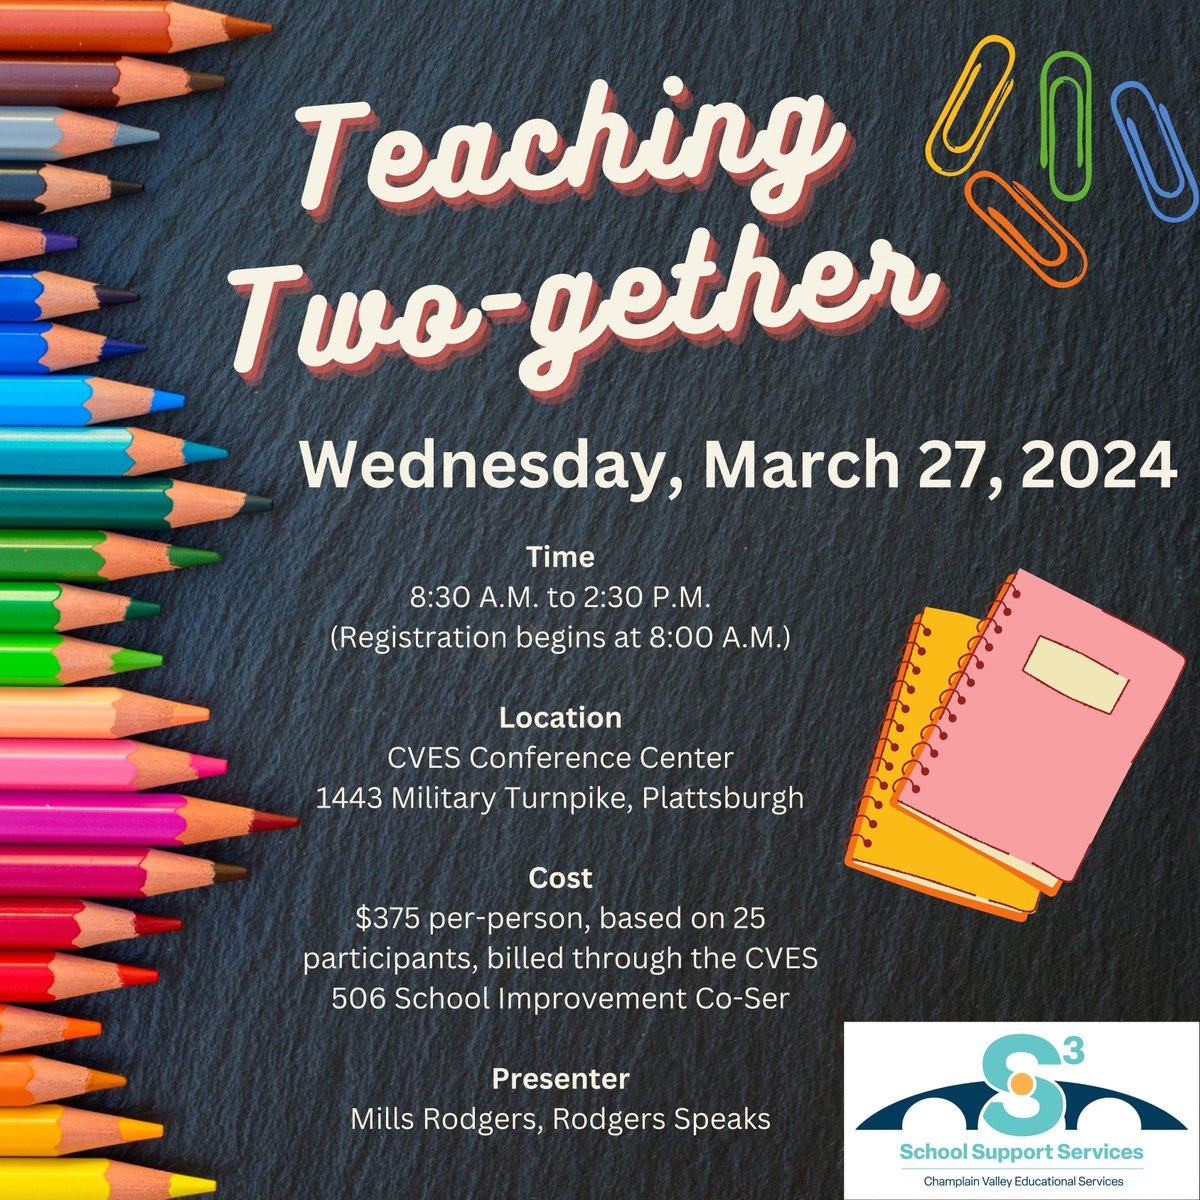 Are you a teacher involved in a co-teaching model at any level? Register now for Teaching Two-Gether here: cves.org/event/teaching…